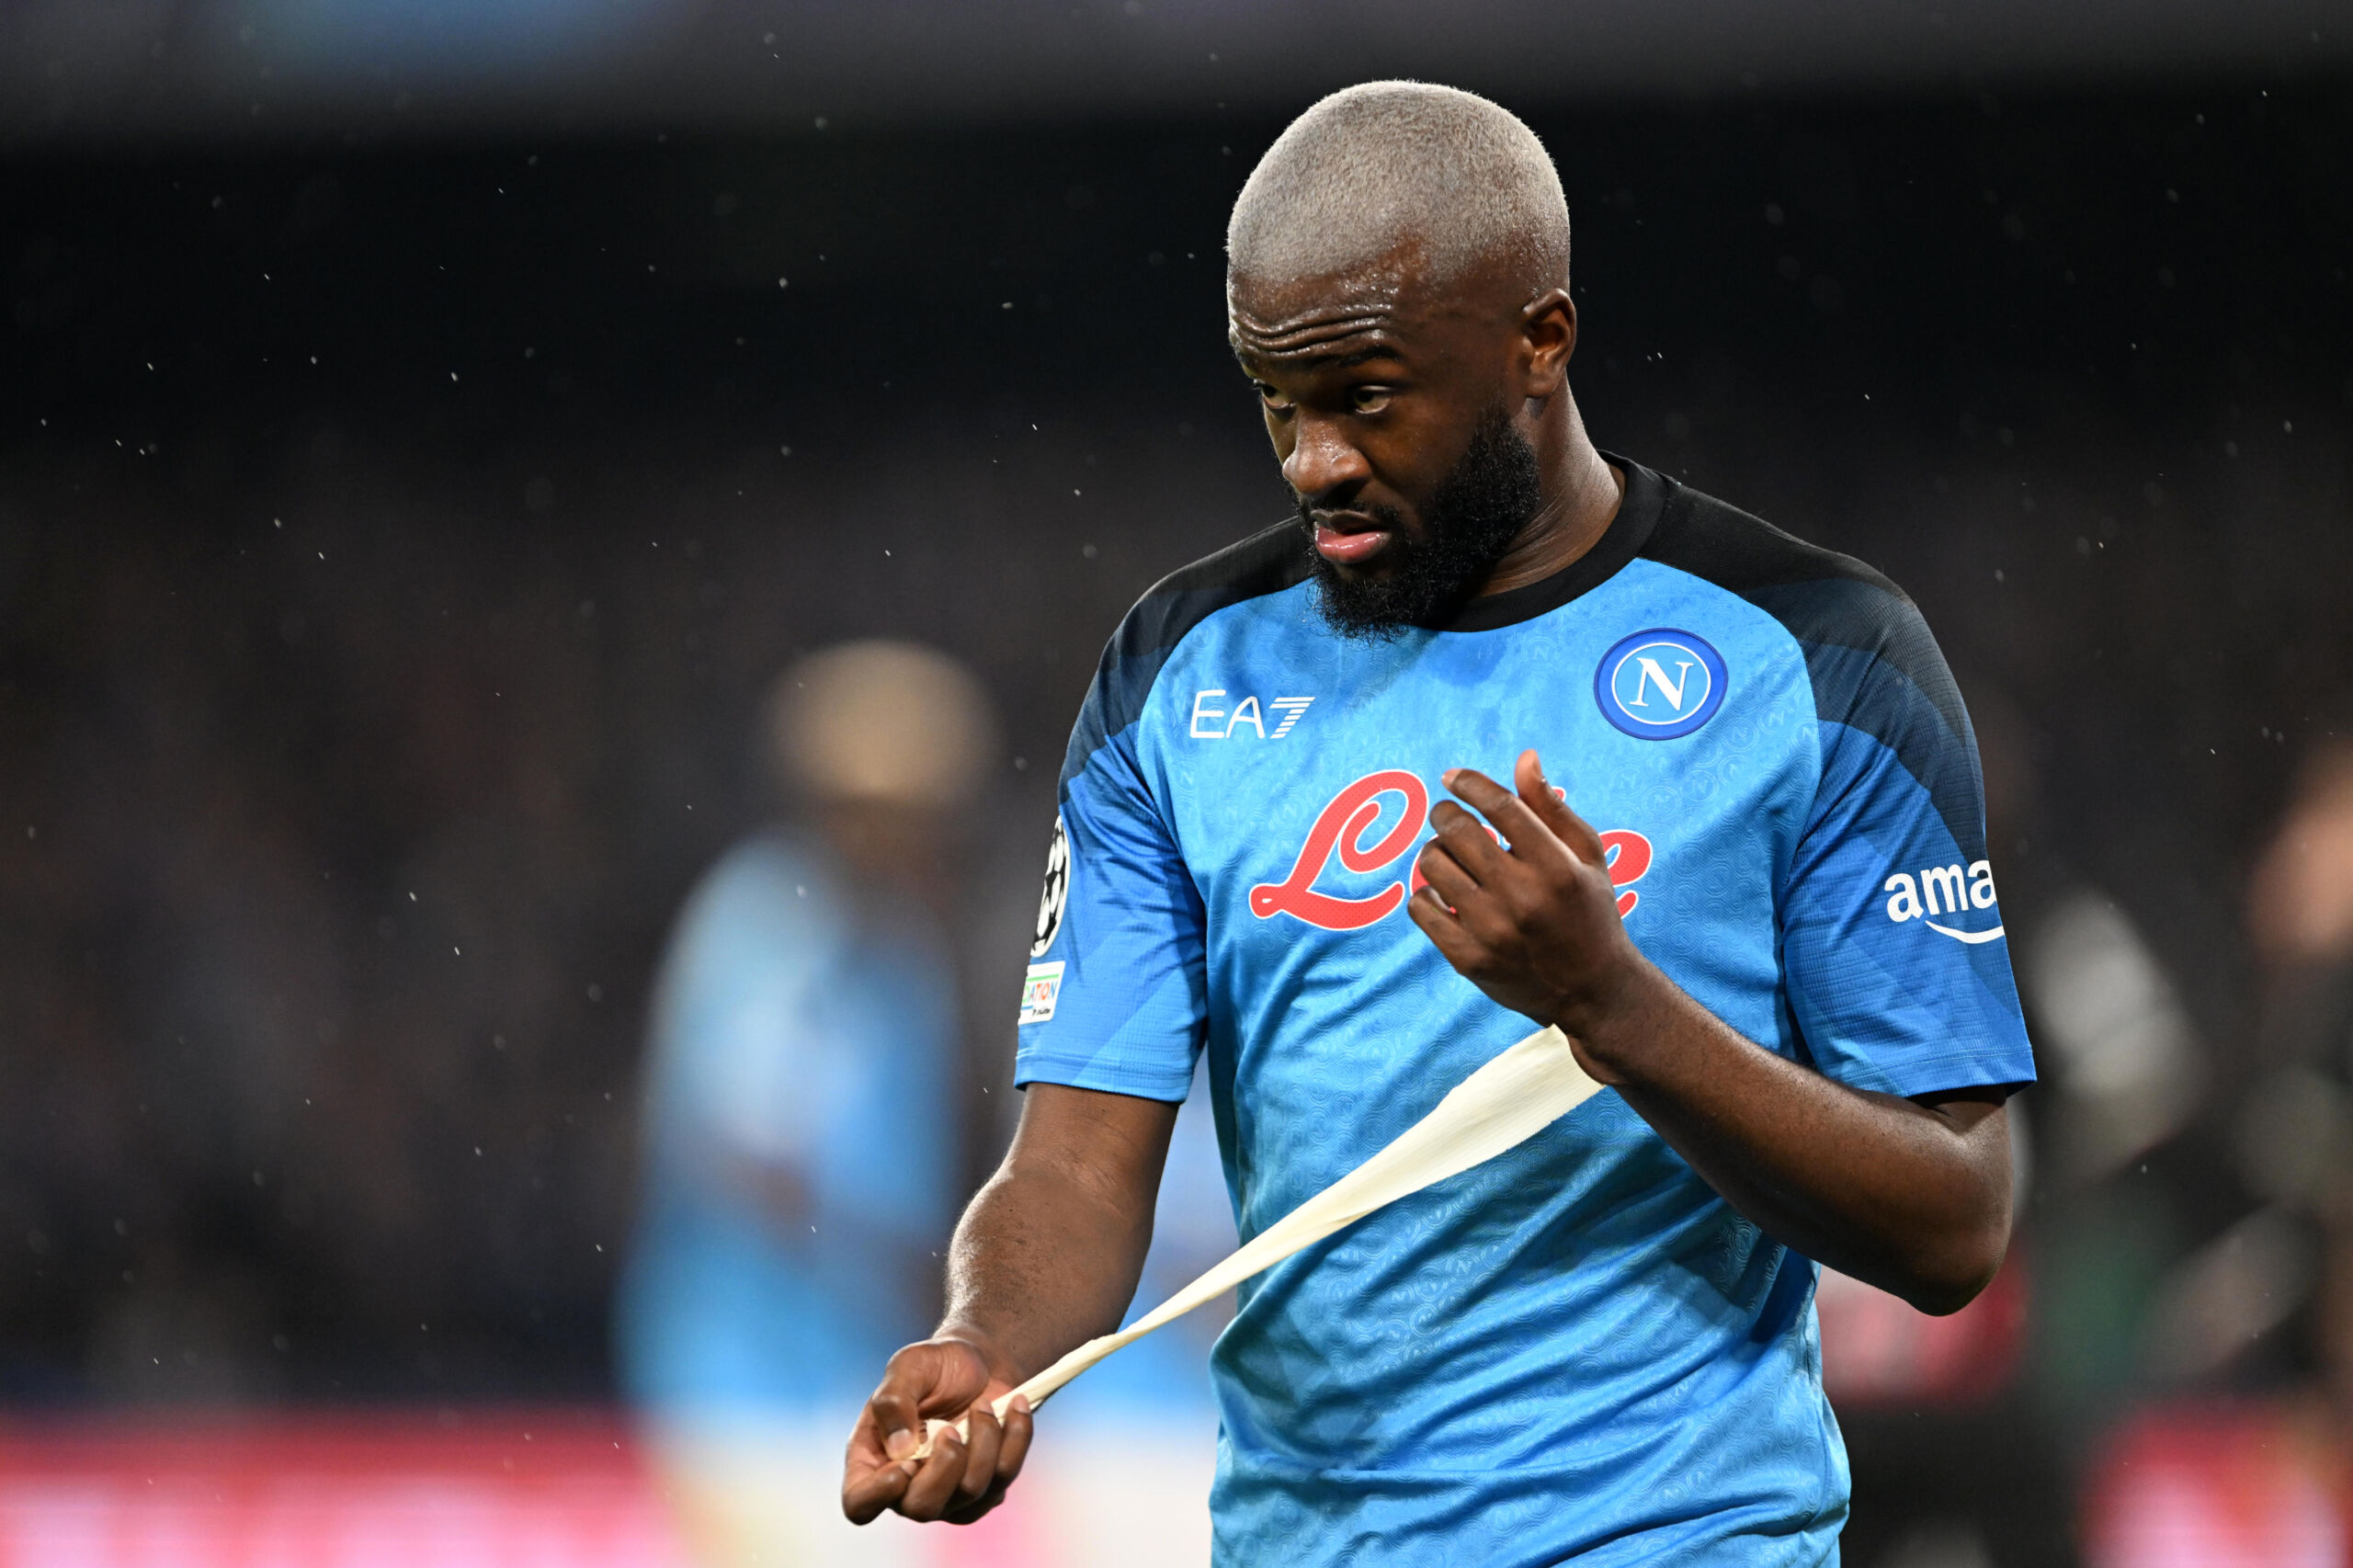 Latest rumour, if true, supports Ange's stance on Tanguy Ndombele